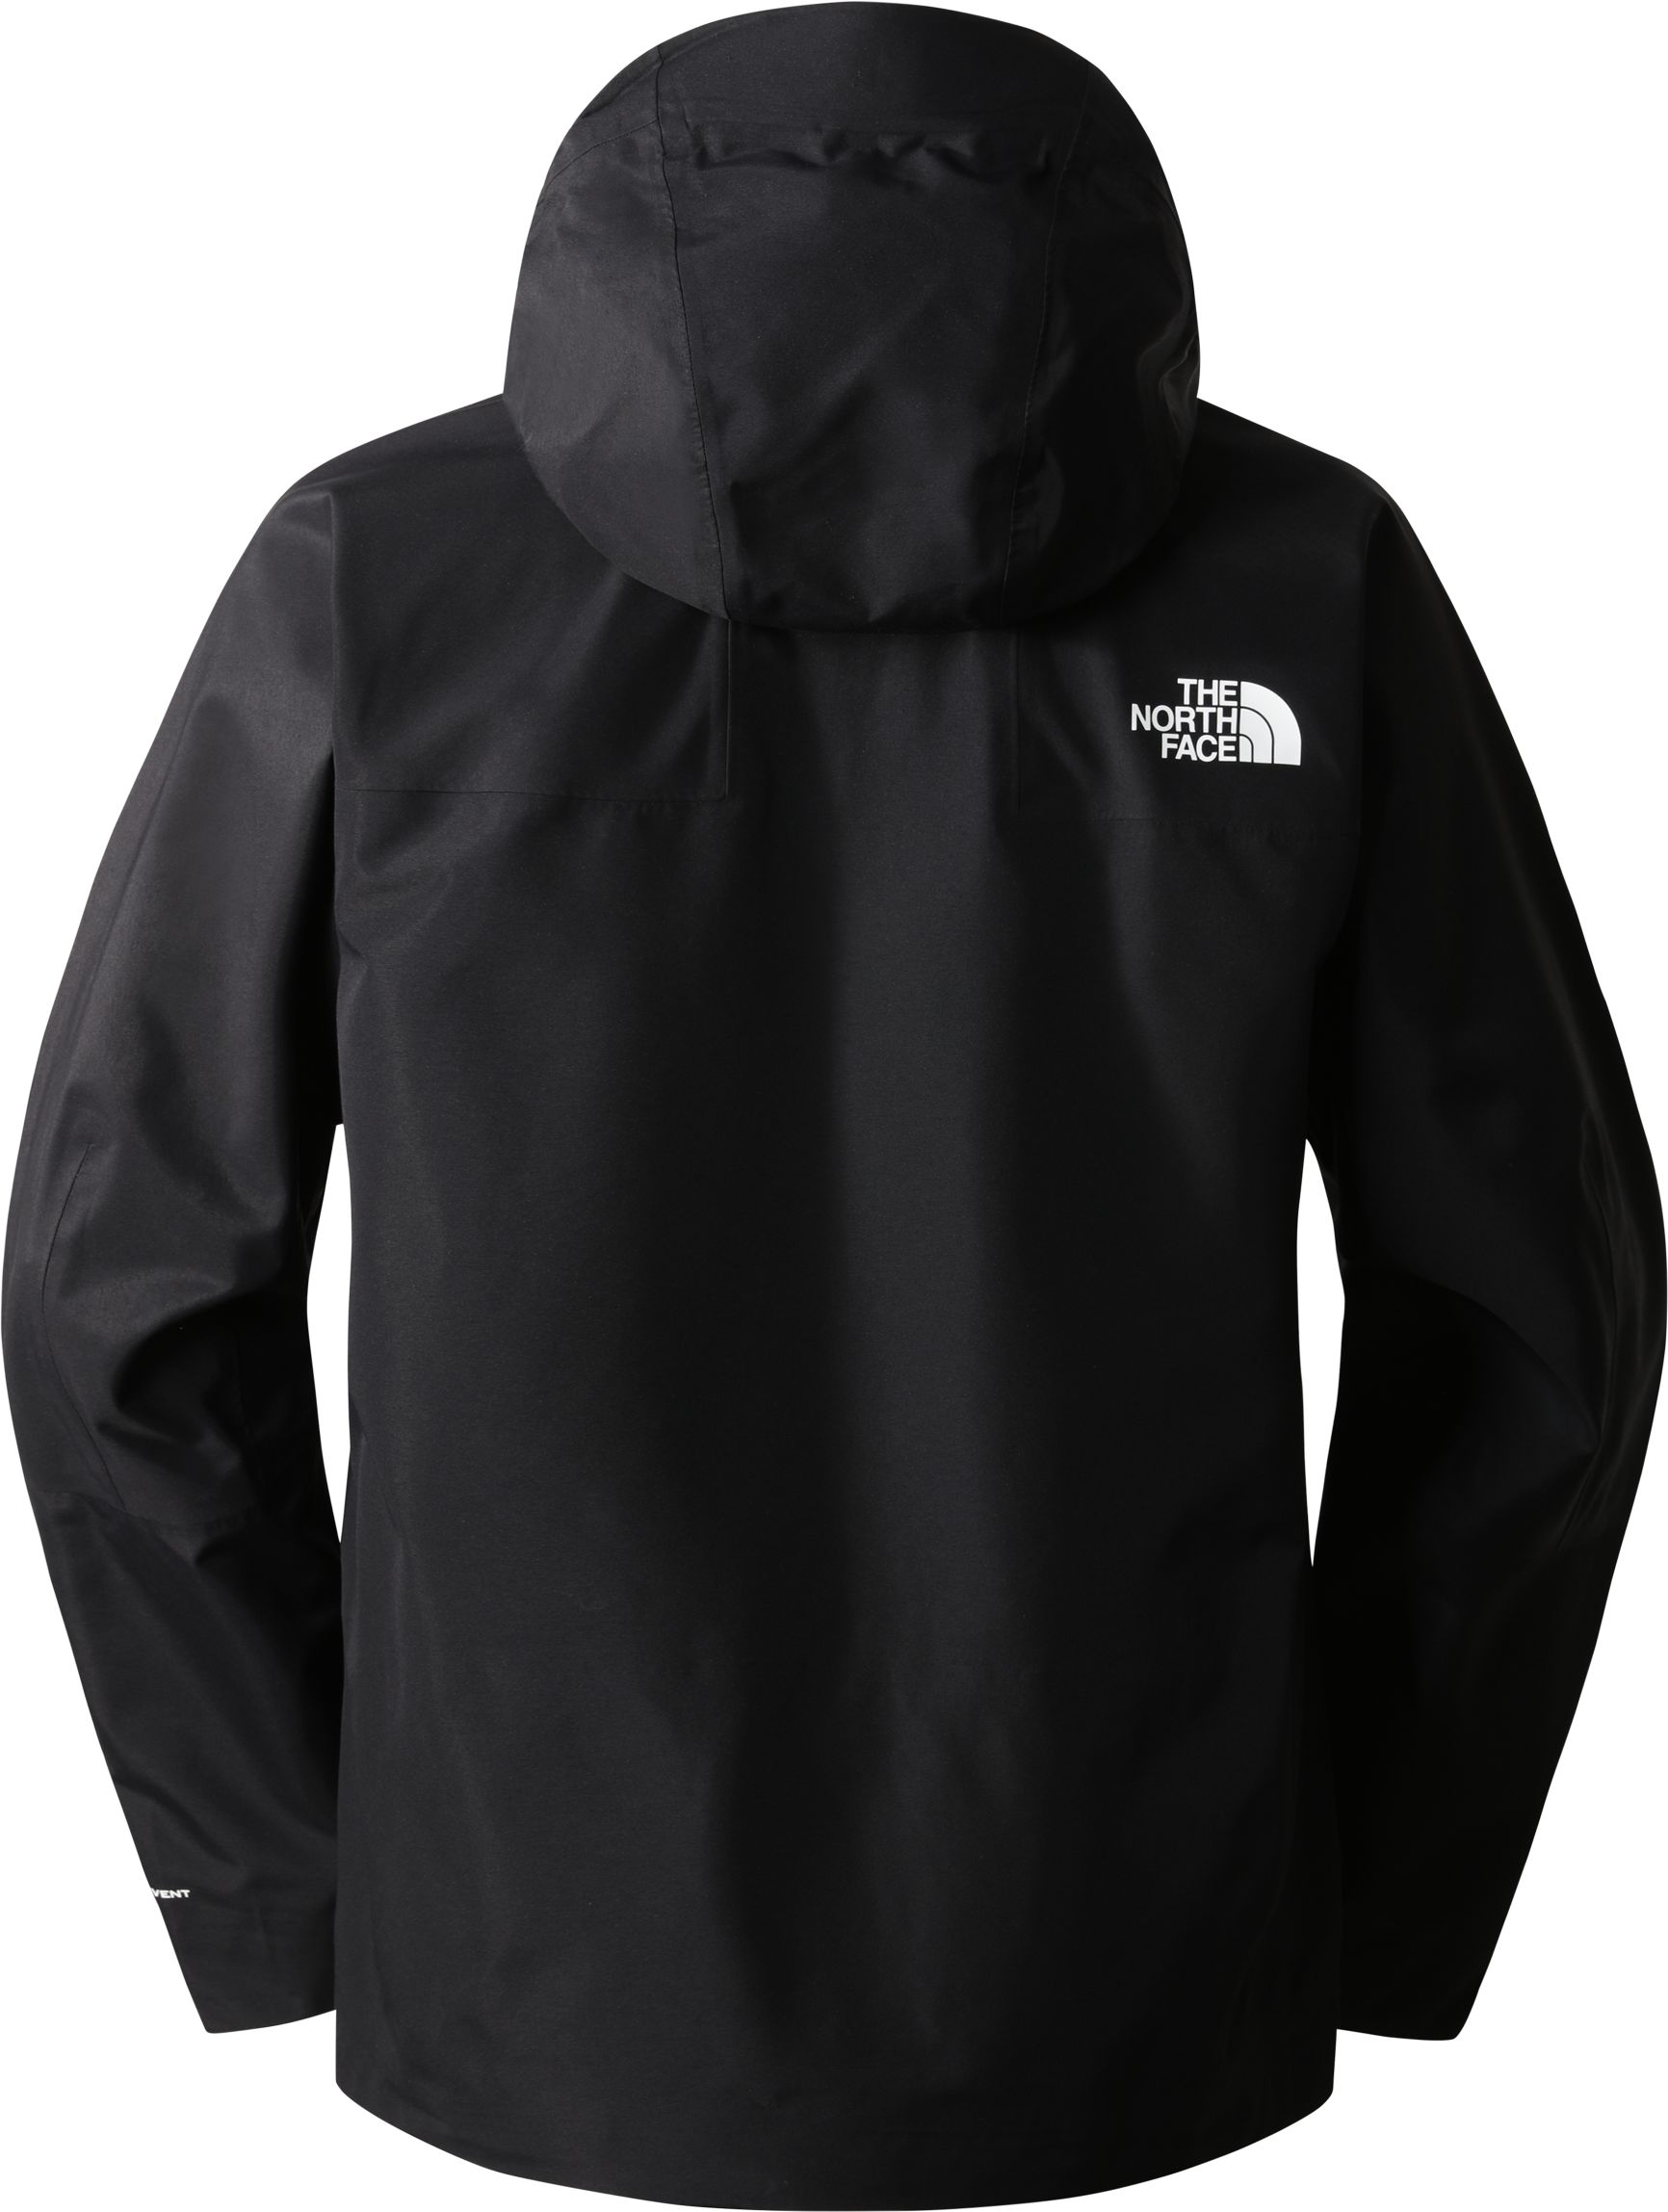 THE NORTH FACE, M CEPTOR JKT